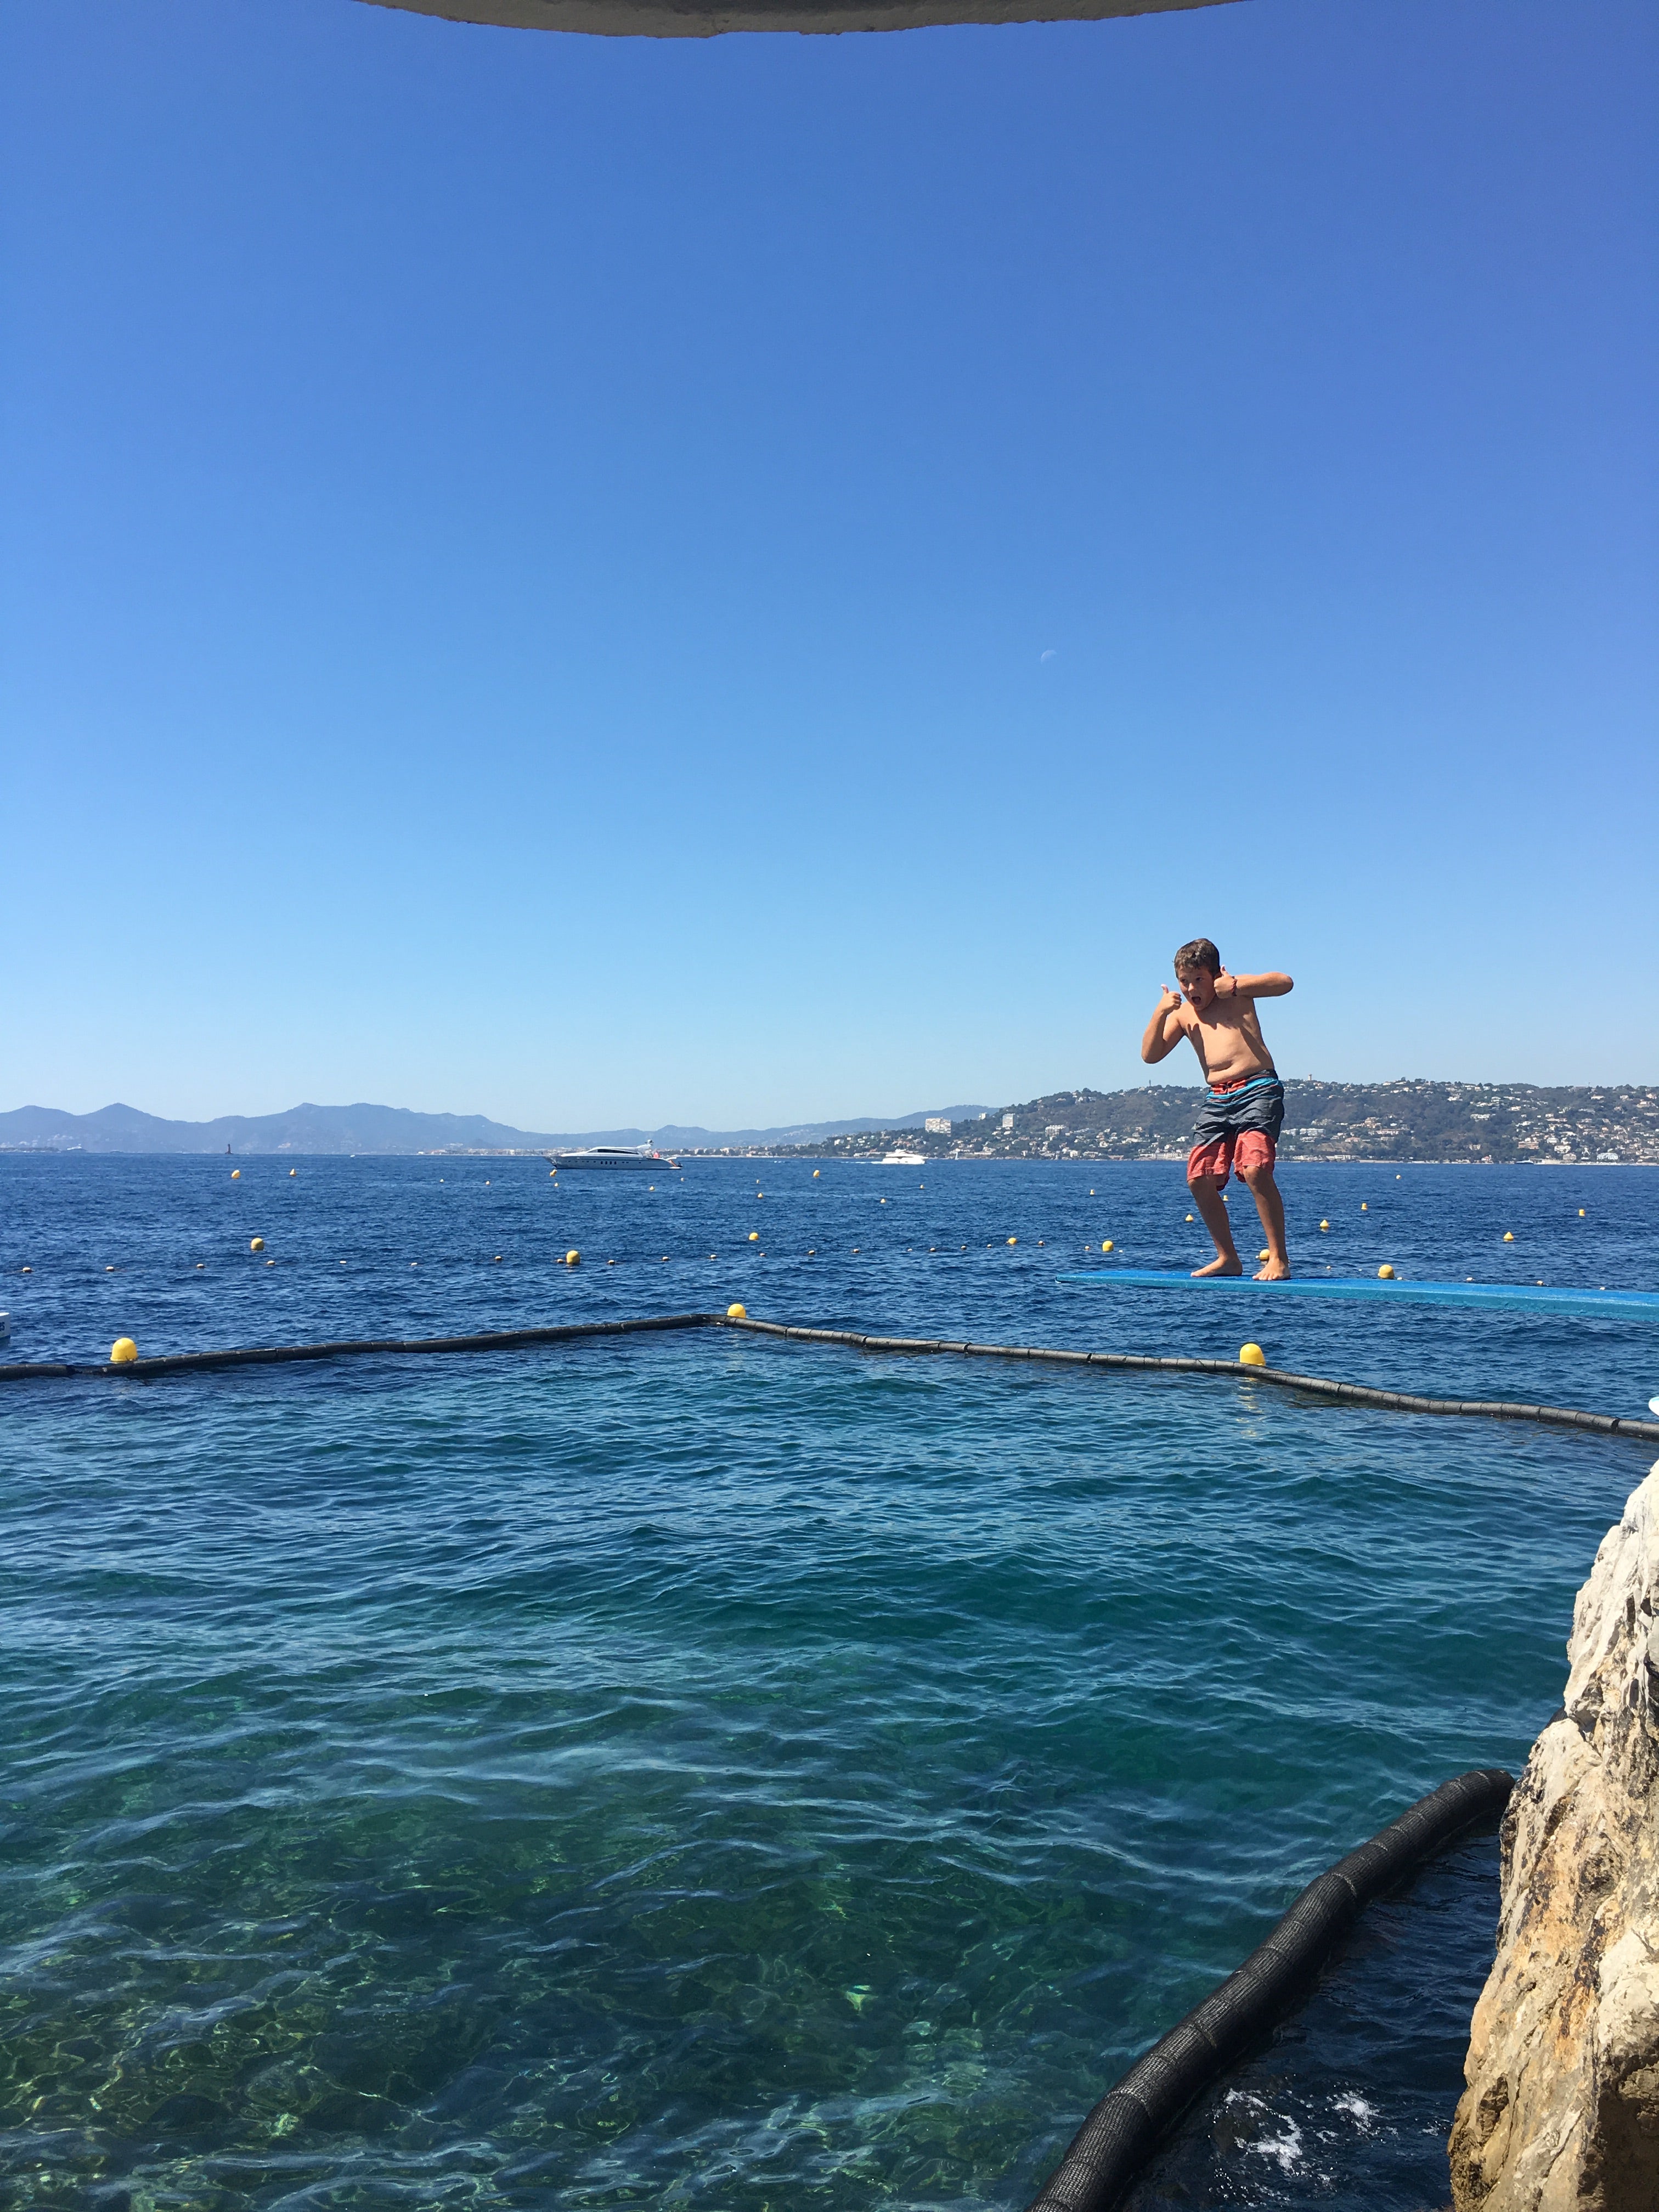 South of France: Part 2 - Let’s travel the world together and find out to how to check the world off your bucket list, one adventure at a time! Read Pickett's Press' travel blogs for inspiring tips and tricks.